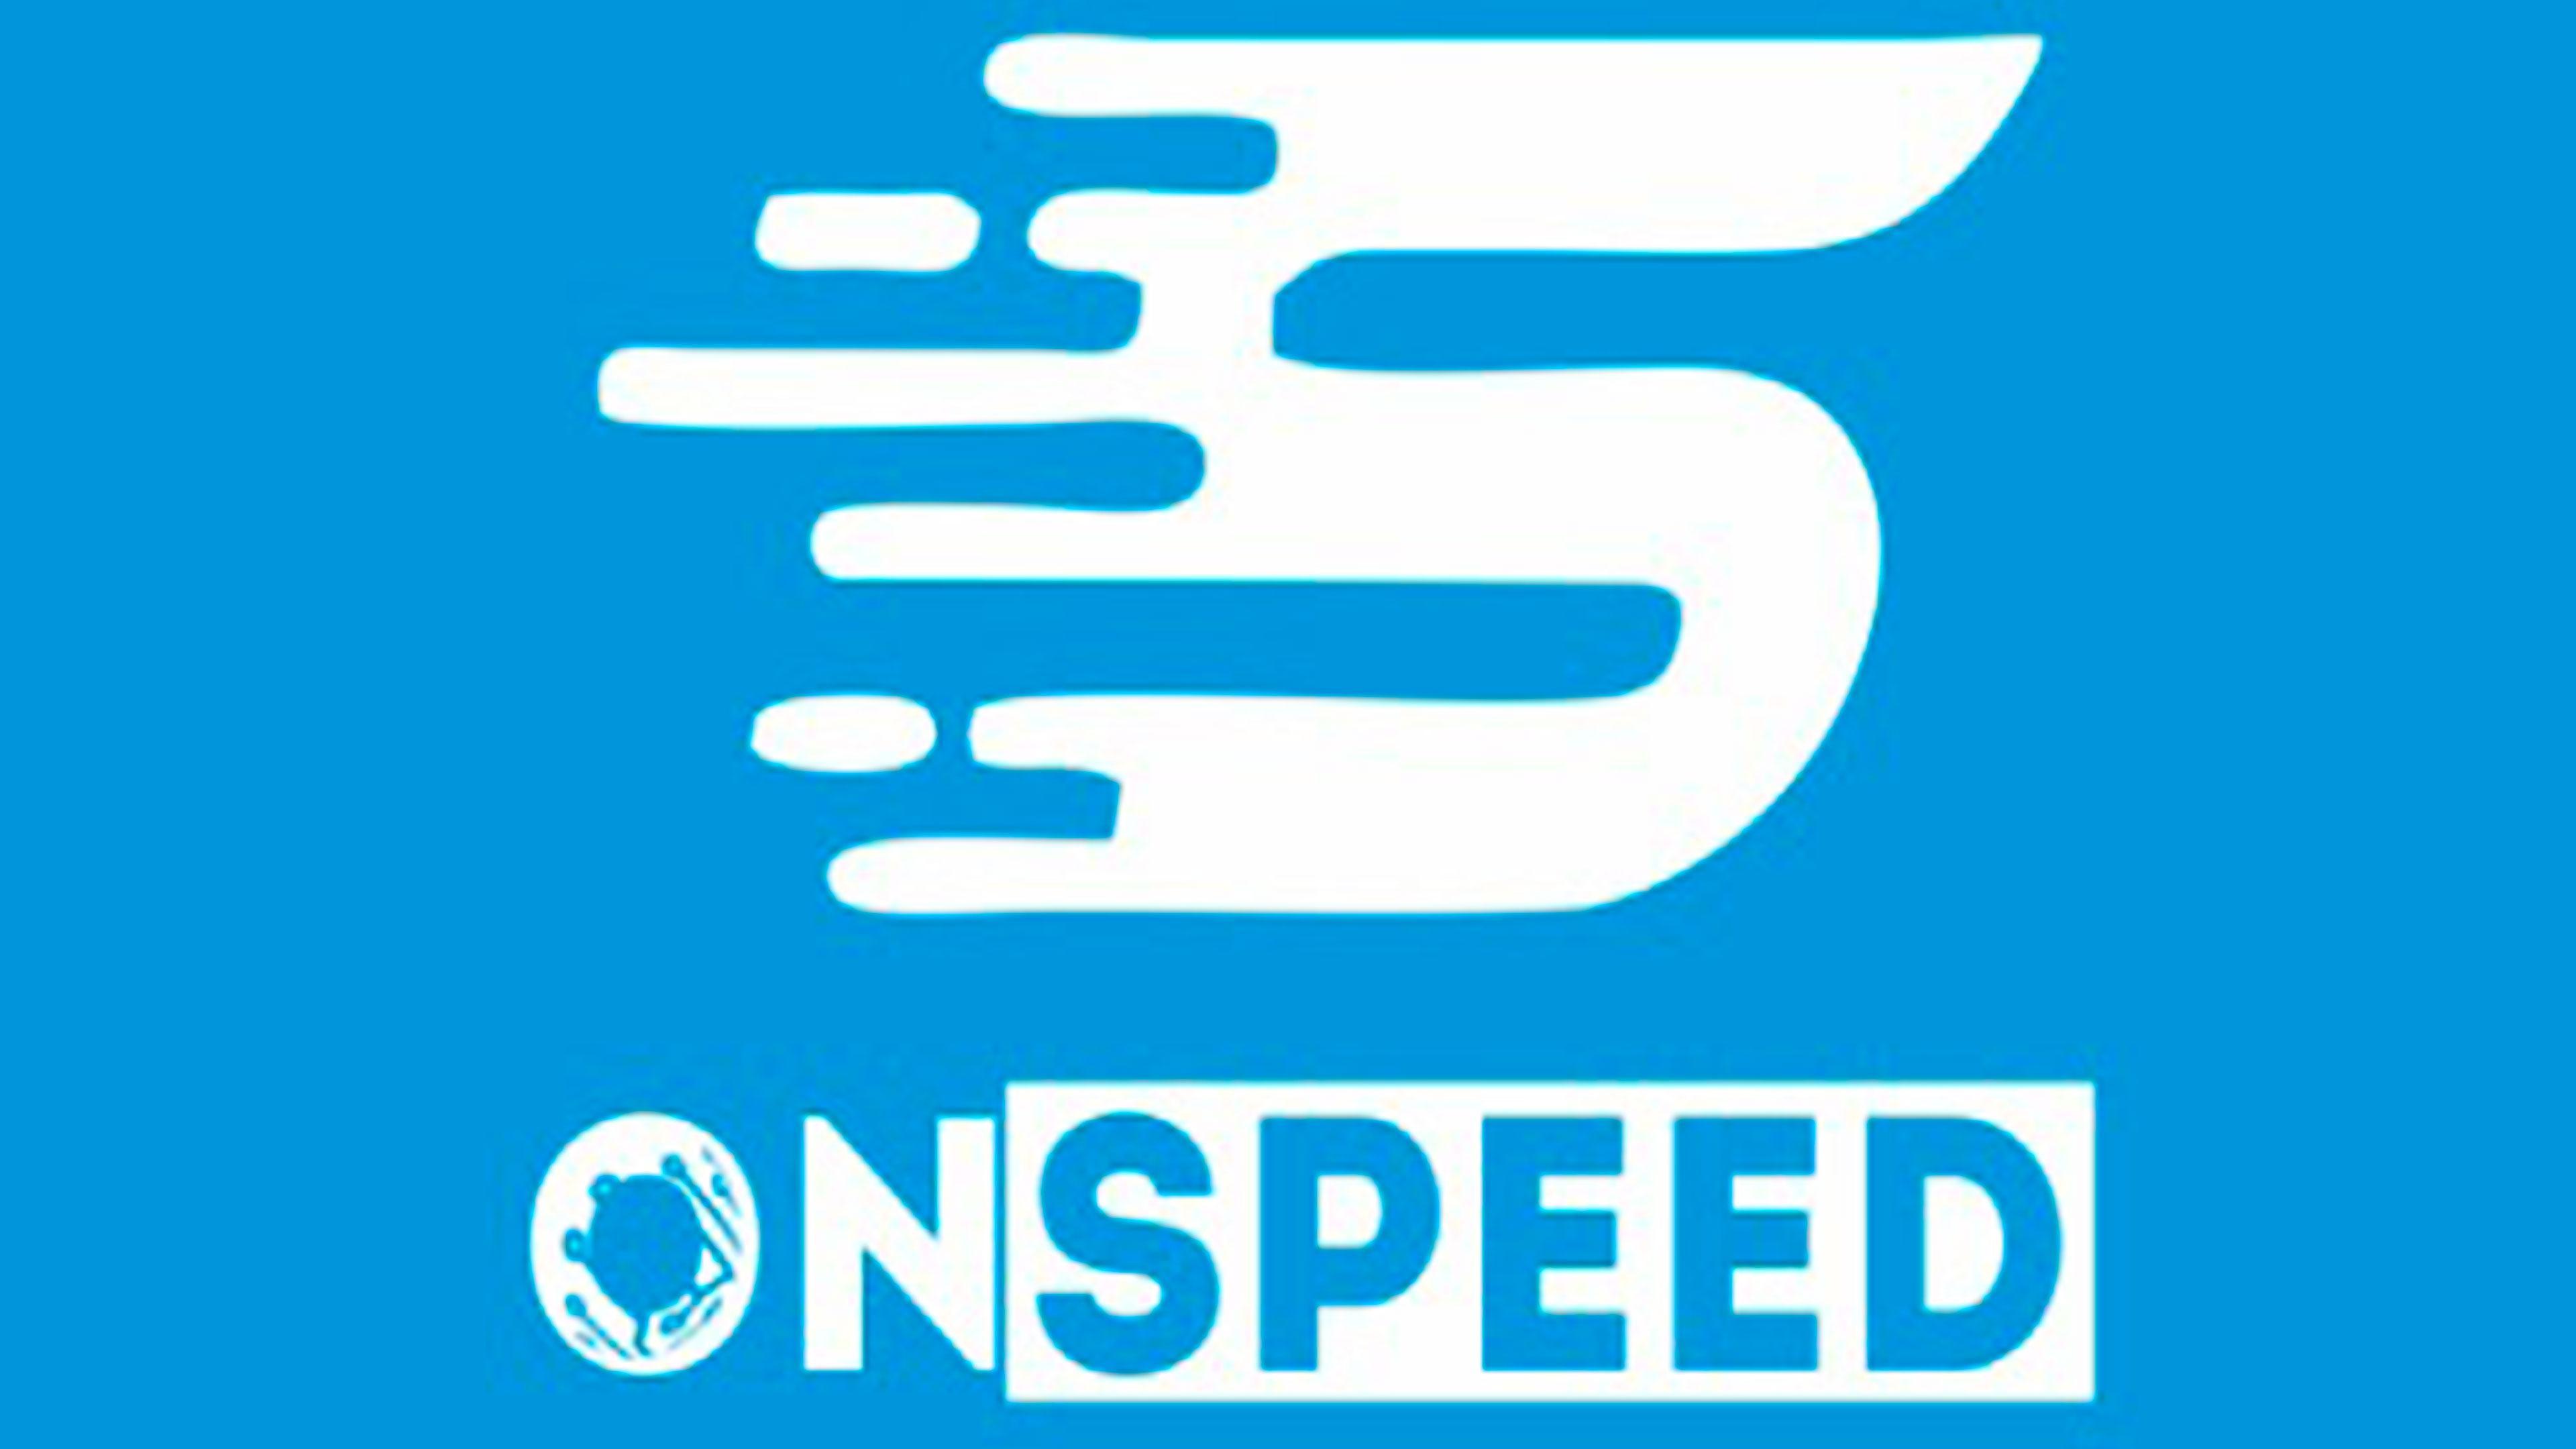 OnSpeed for Android - APK Download